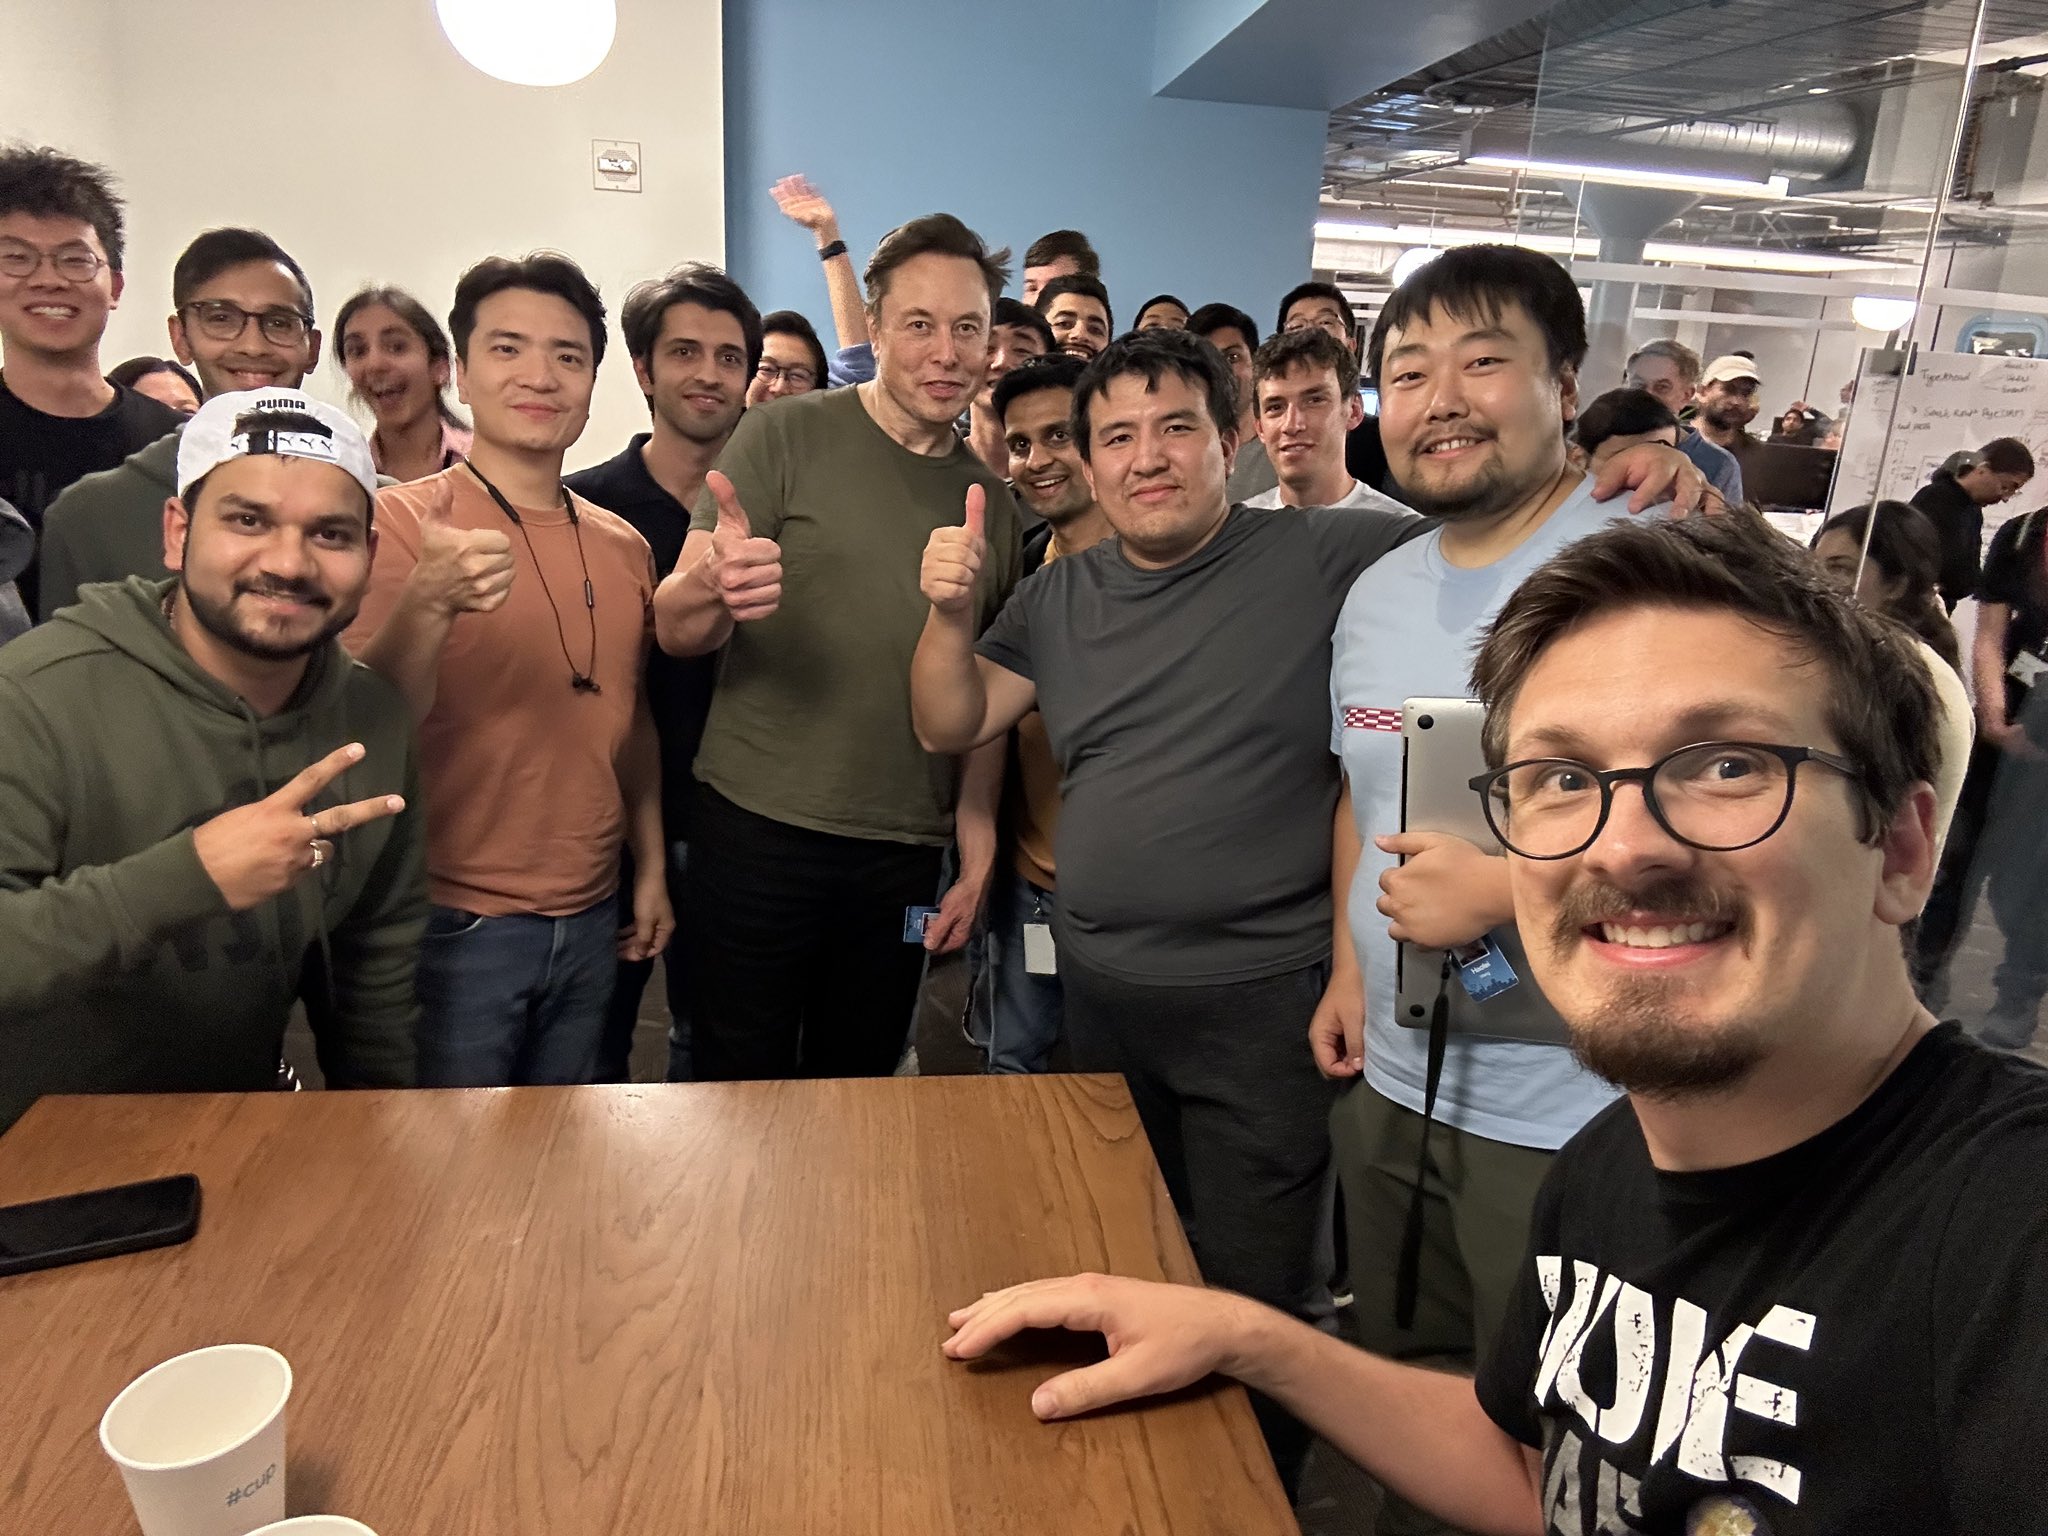 Elon Musk with the programmers and engineers he recruited to his San Francisco offices (Twitter: @elonmusk)